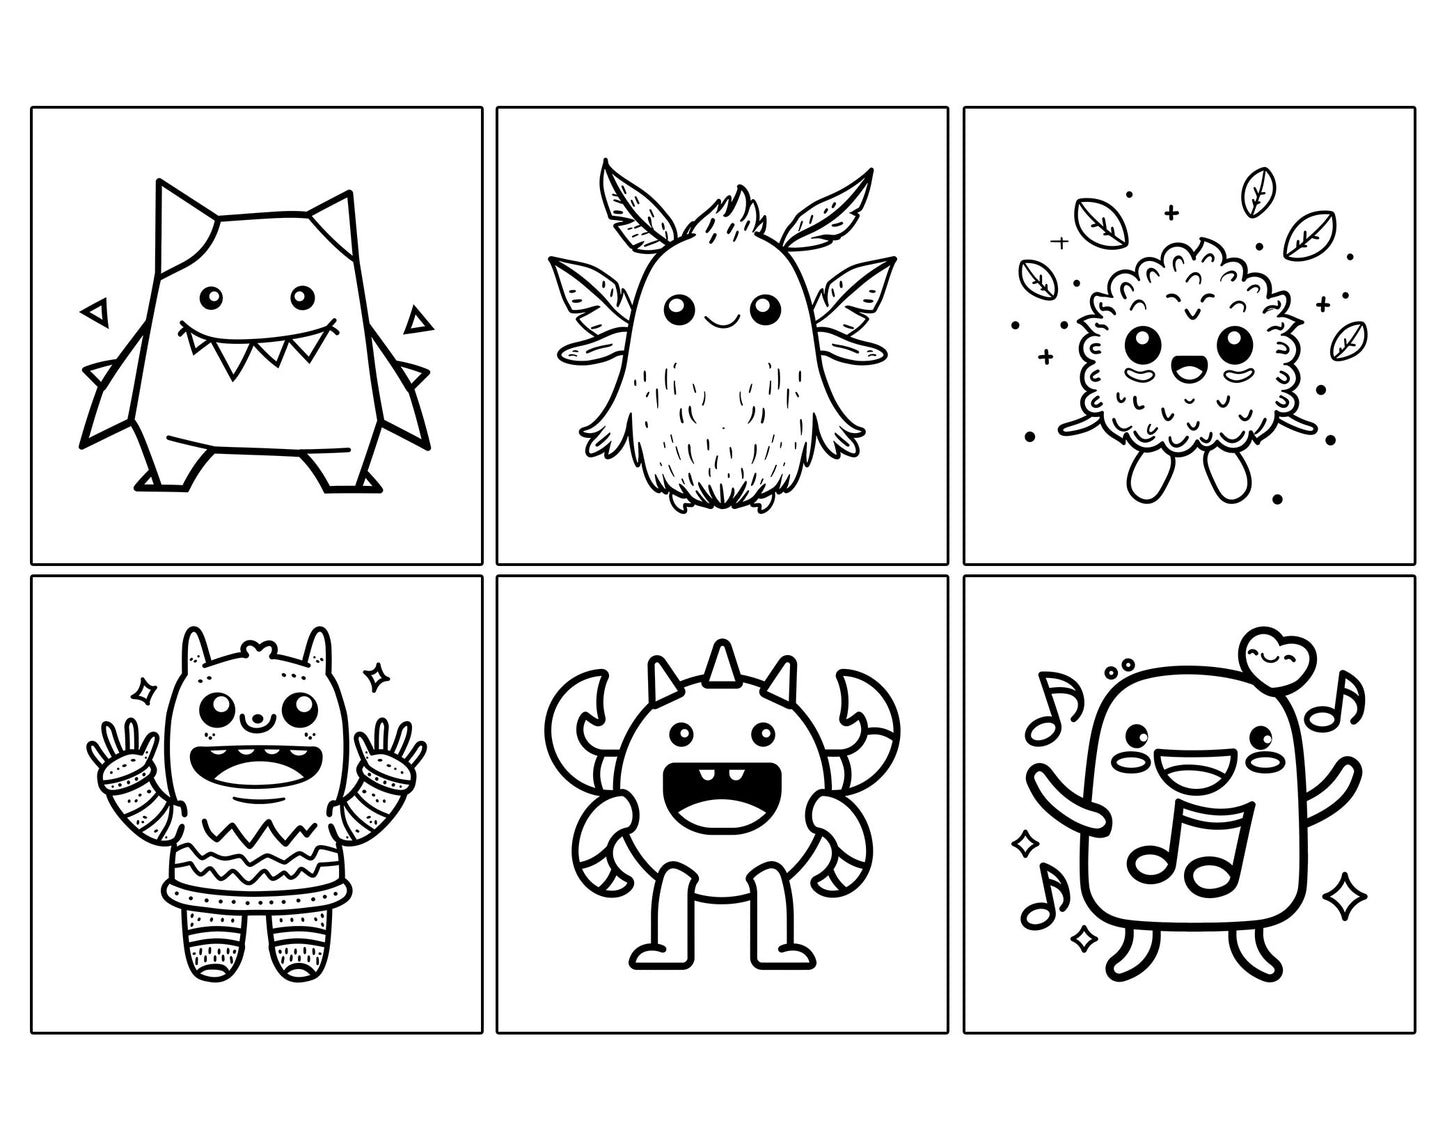 60 Kawaii Monsters Cute & Simple Coloring Pages - Instant Download - Printable PDF